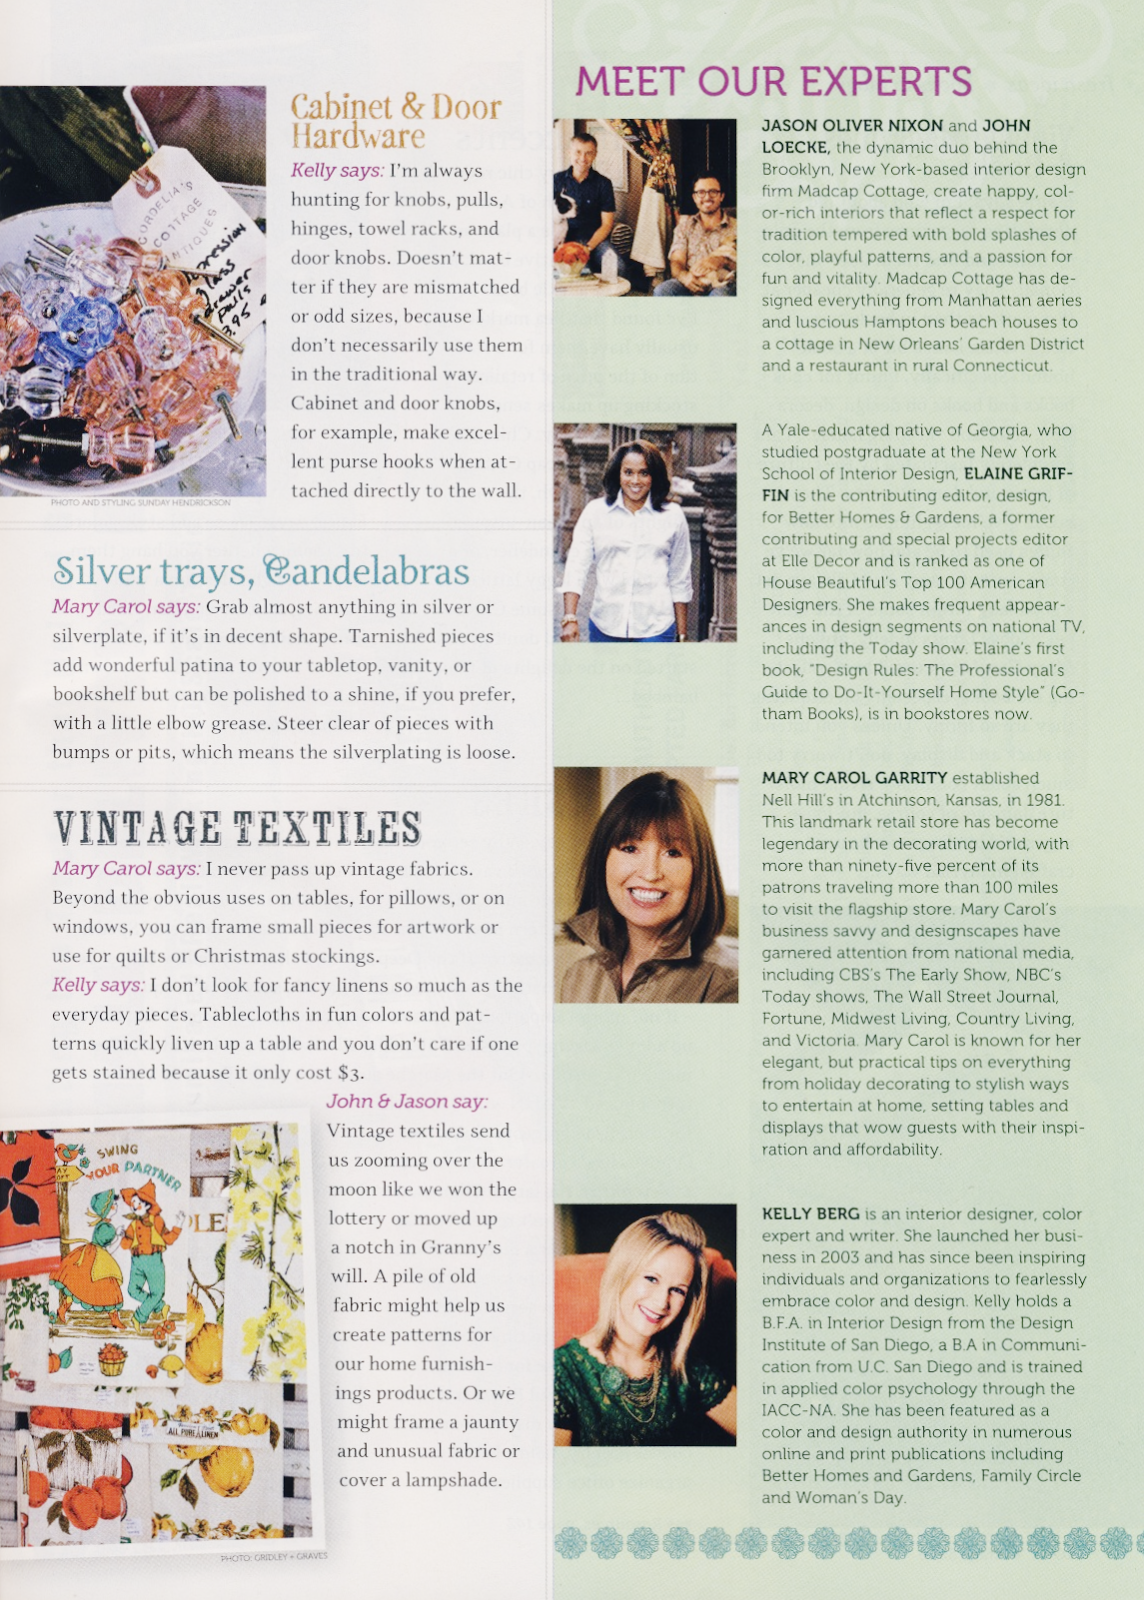 ... Markets and Estate Sales: My Tips Featured in Vintage Style Magazine